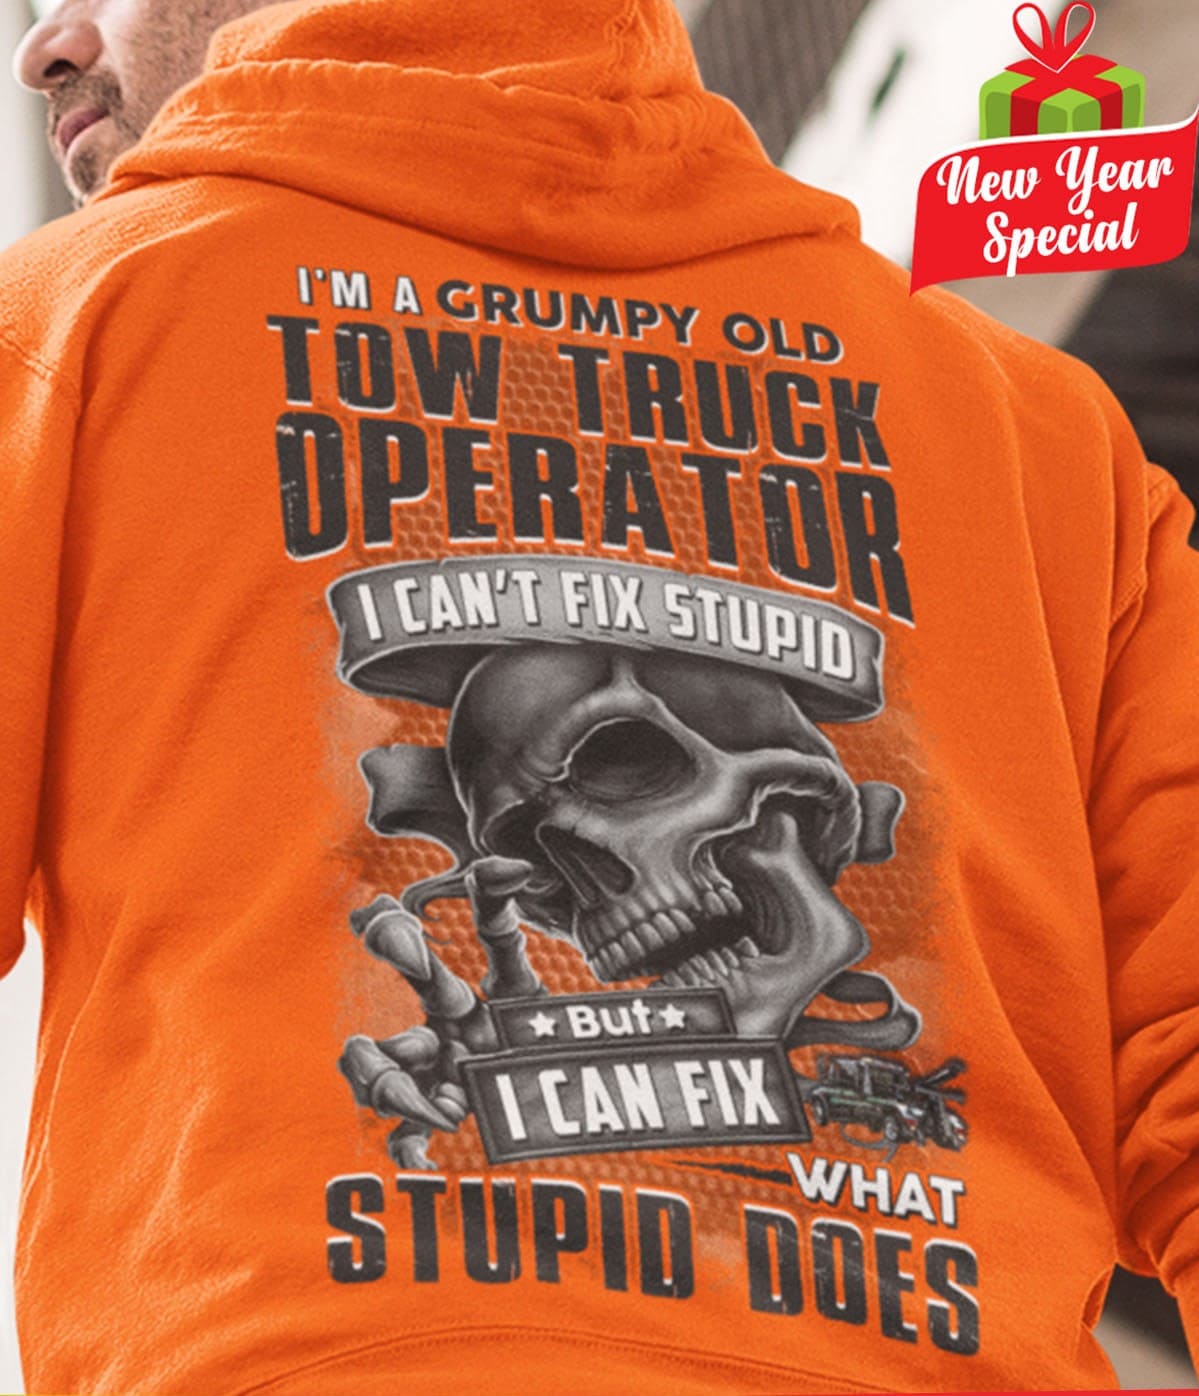 Tow Truck Operator Skull - I'm a grumpy old tow truck operator i can't fix stupid but i can fix what stupid does